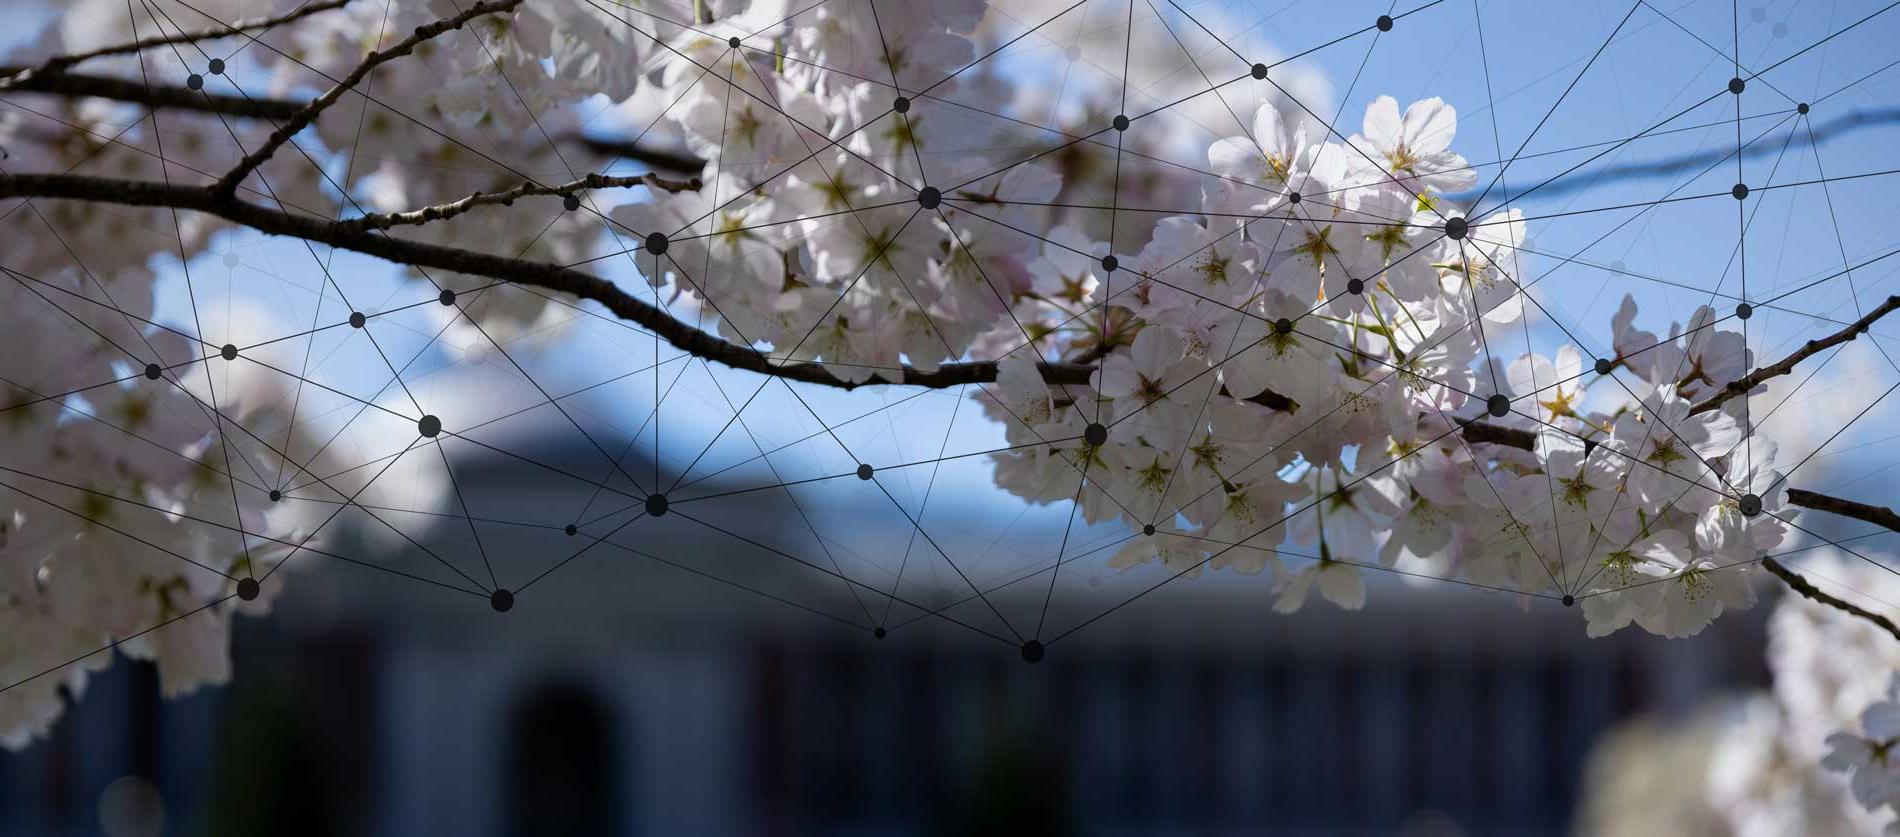 cherry blossoms with an overlay of connected dots with lines, creating a network effect